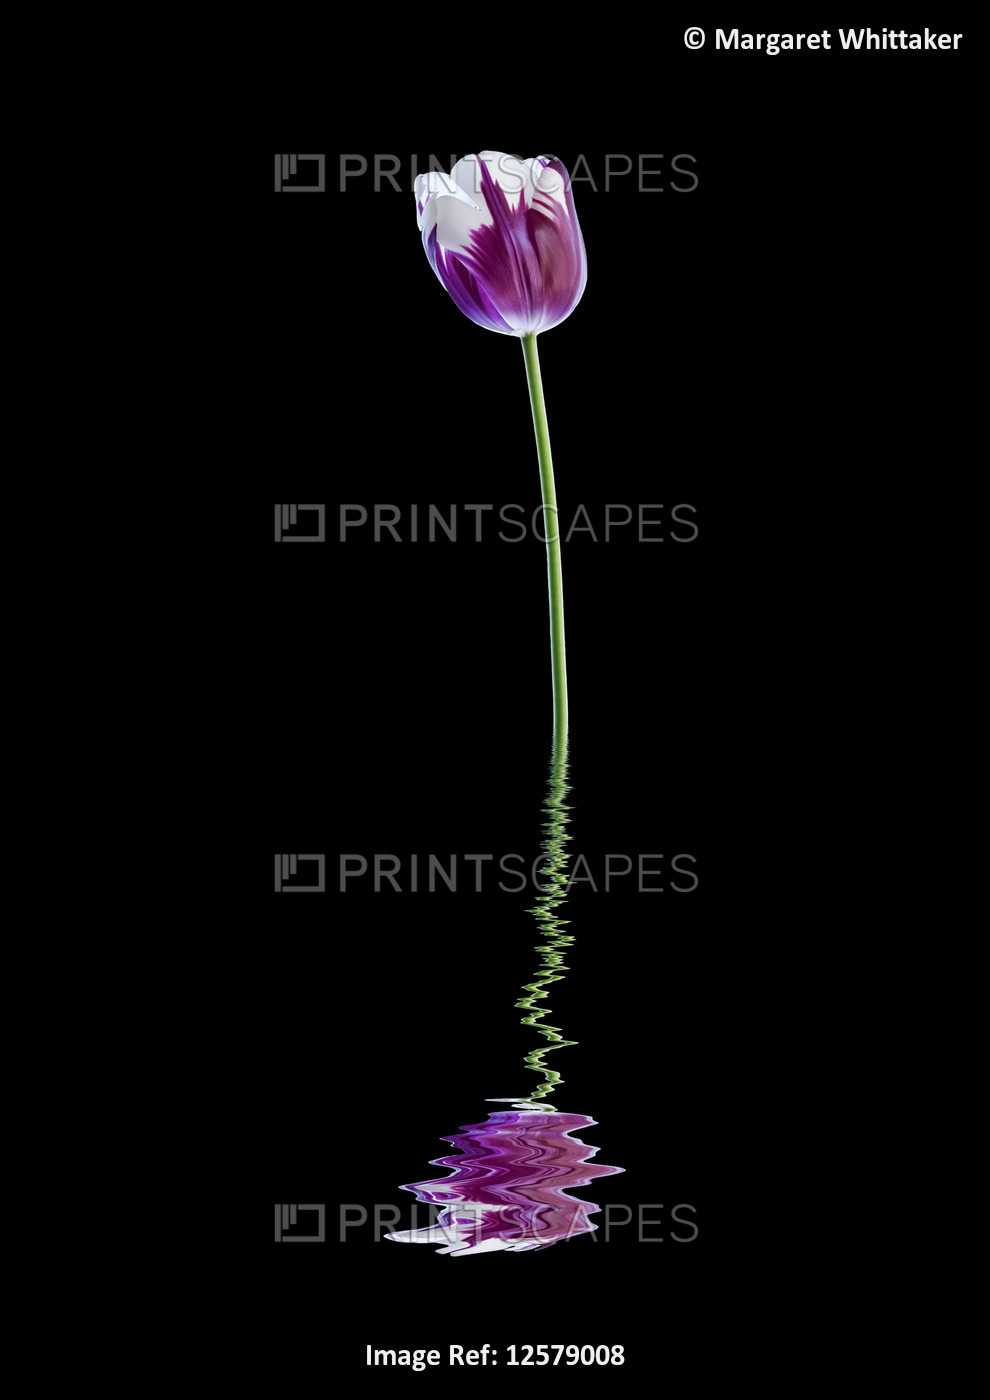 Art style image of white and purple tulip 'Rembrandt' reflected in water; Studio